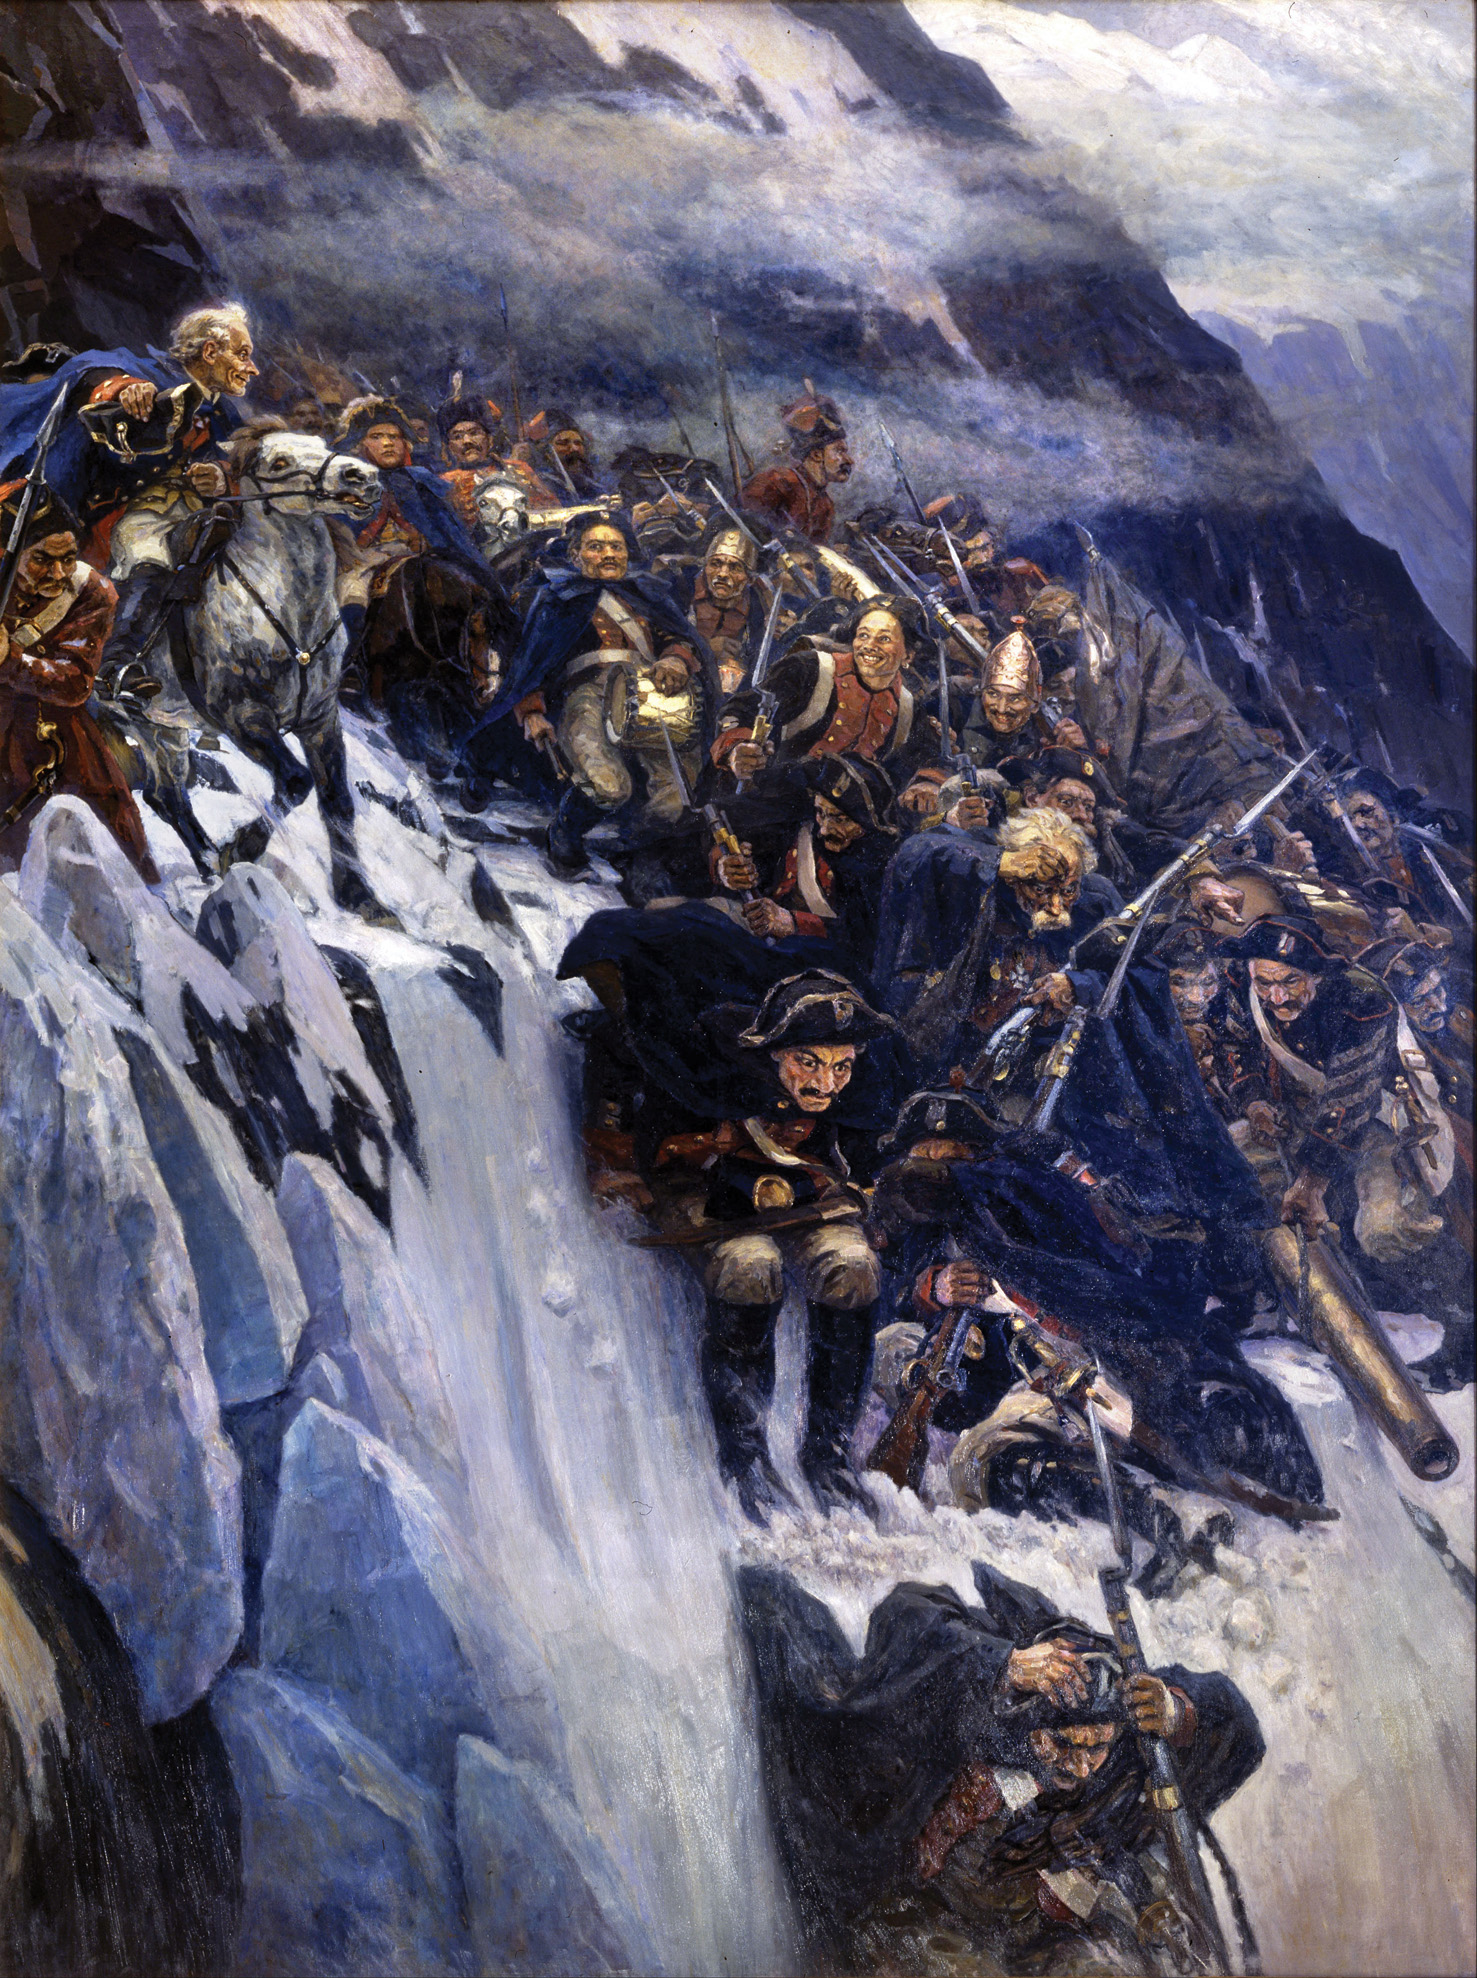 A romantic depiction of Mikhail Suvorov’s army crossing the snow-covered Alps. The brilliant Russian general successfully extracted his army from the mountains in 1799 in the face of superior French forces.